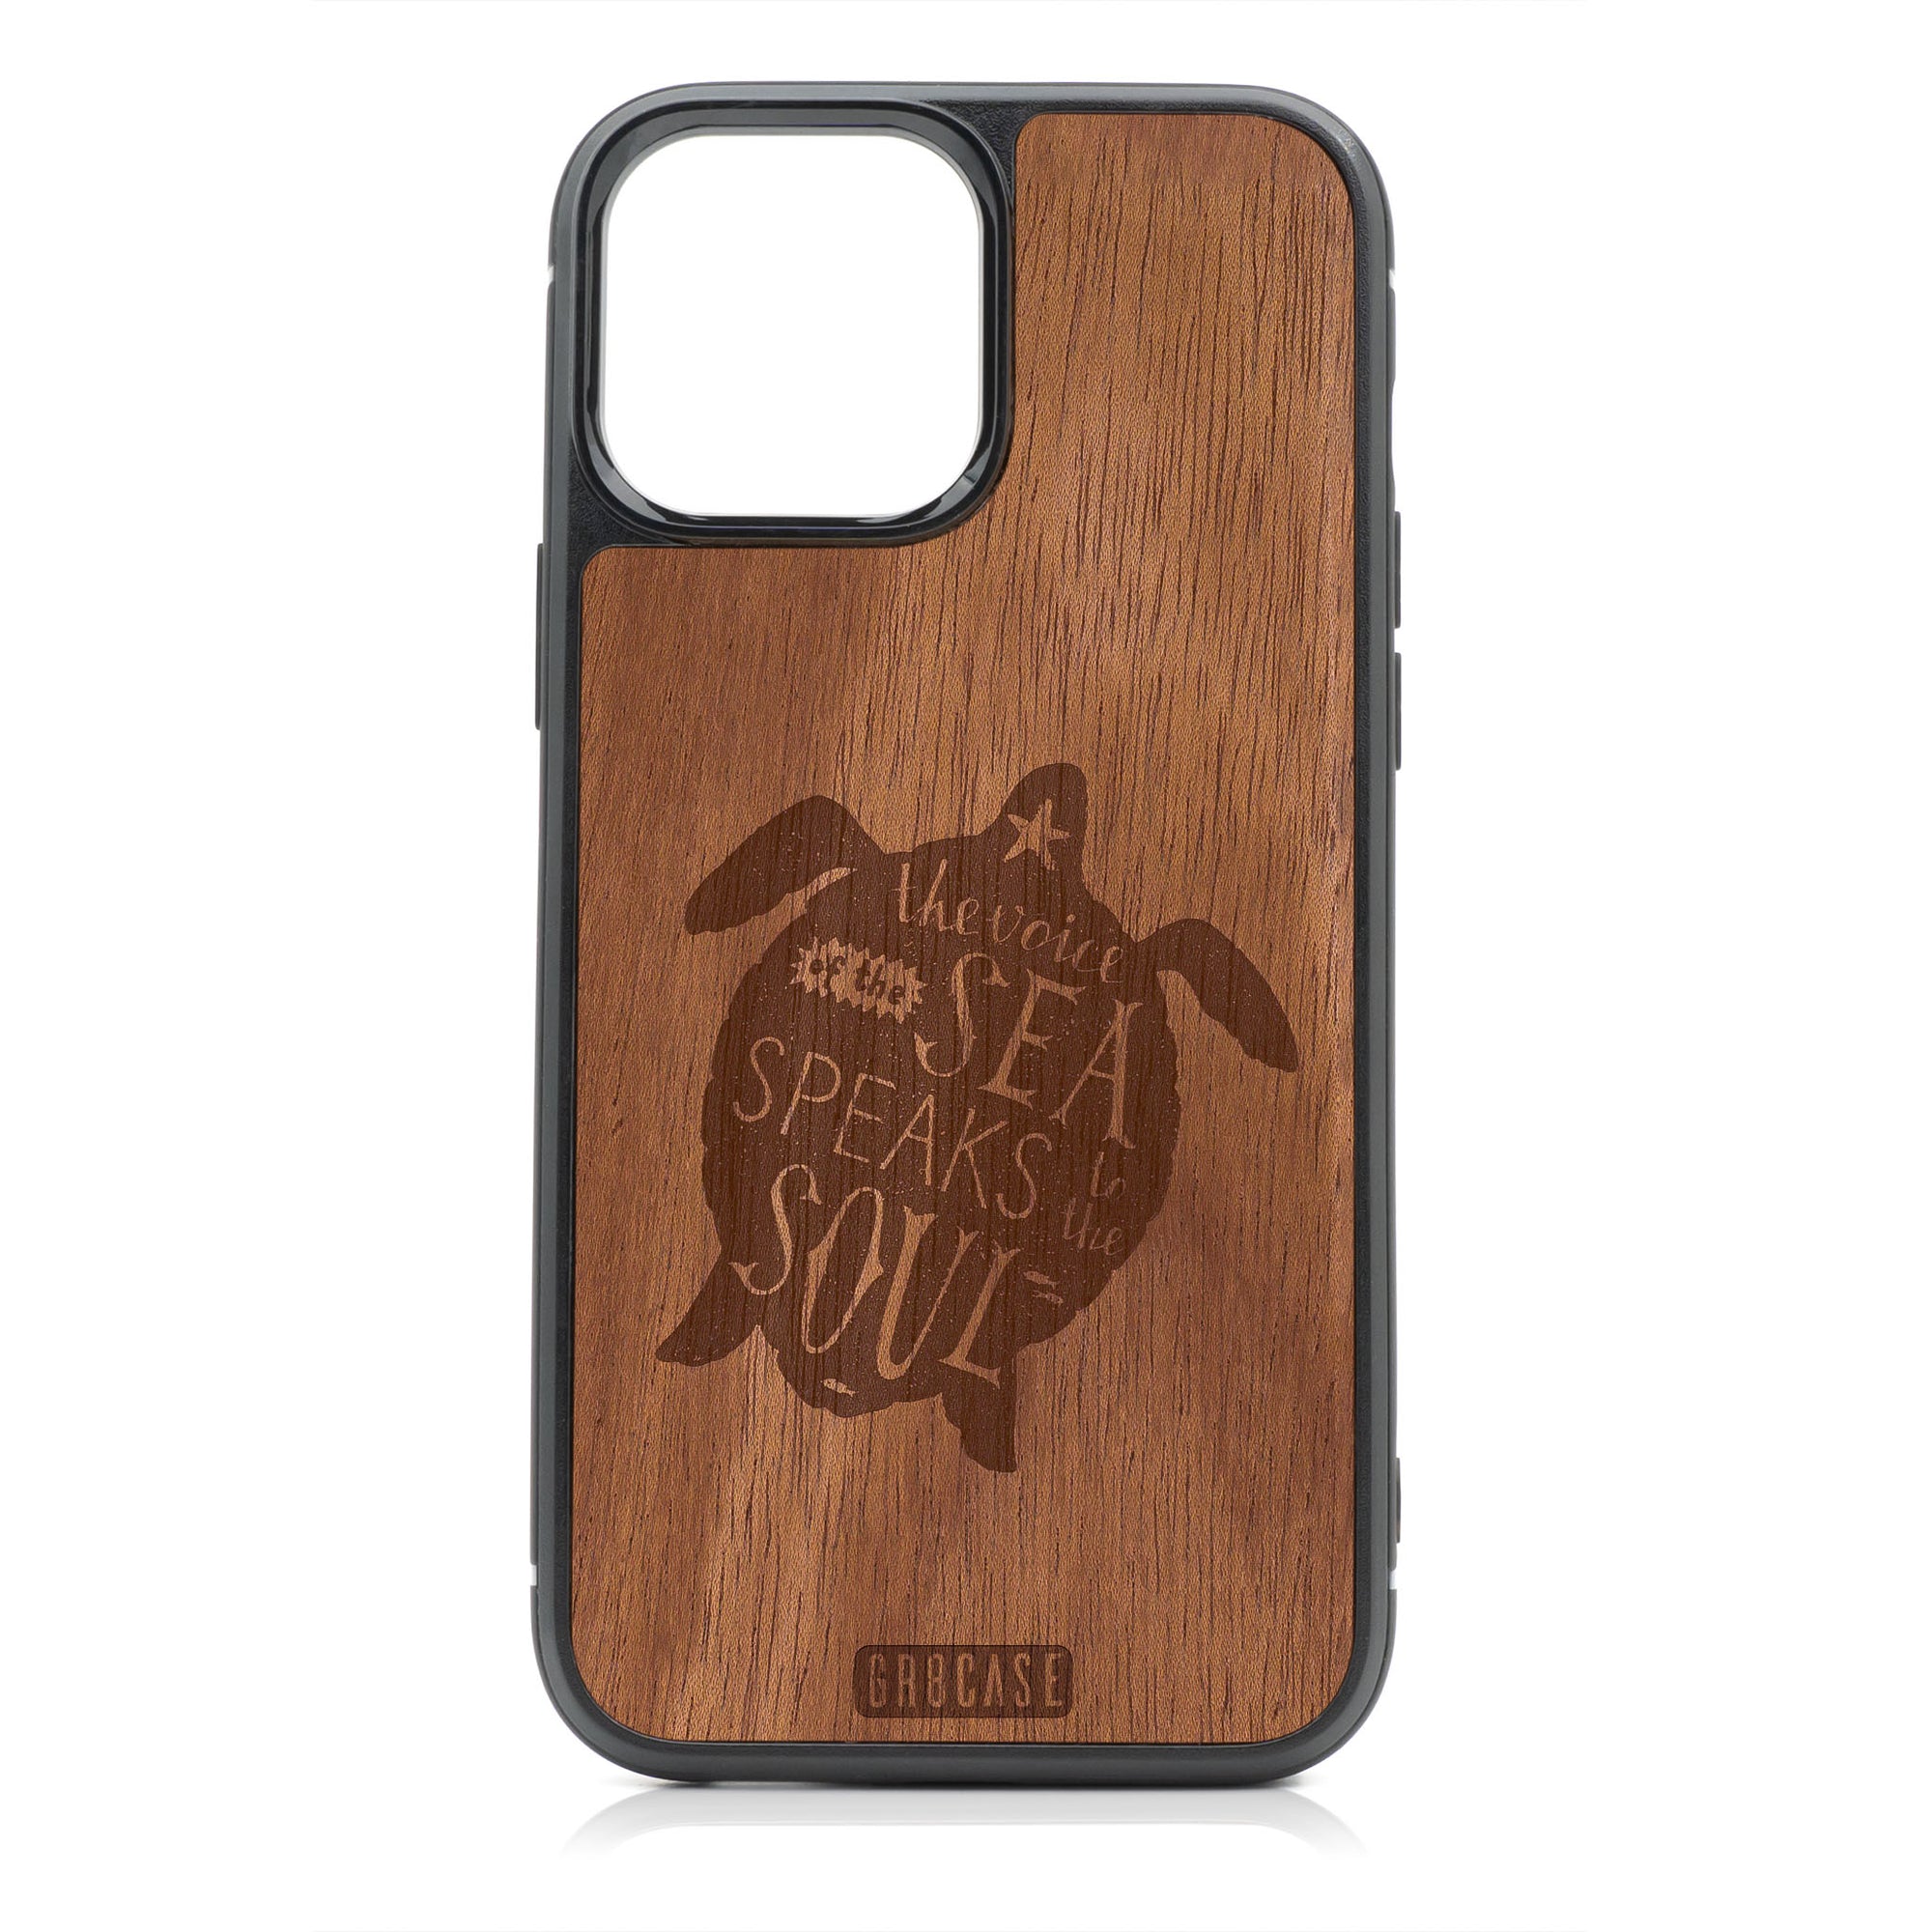 The Voice Of The Sea Speaks To The Soul (Turtle) Design Wood Case For iPhone 13 Pro Max